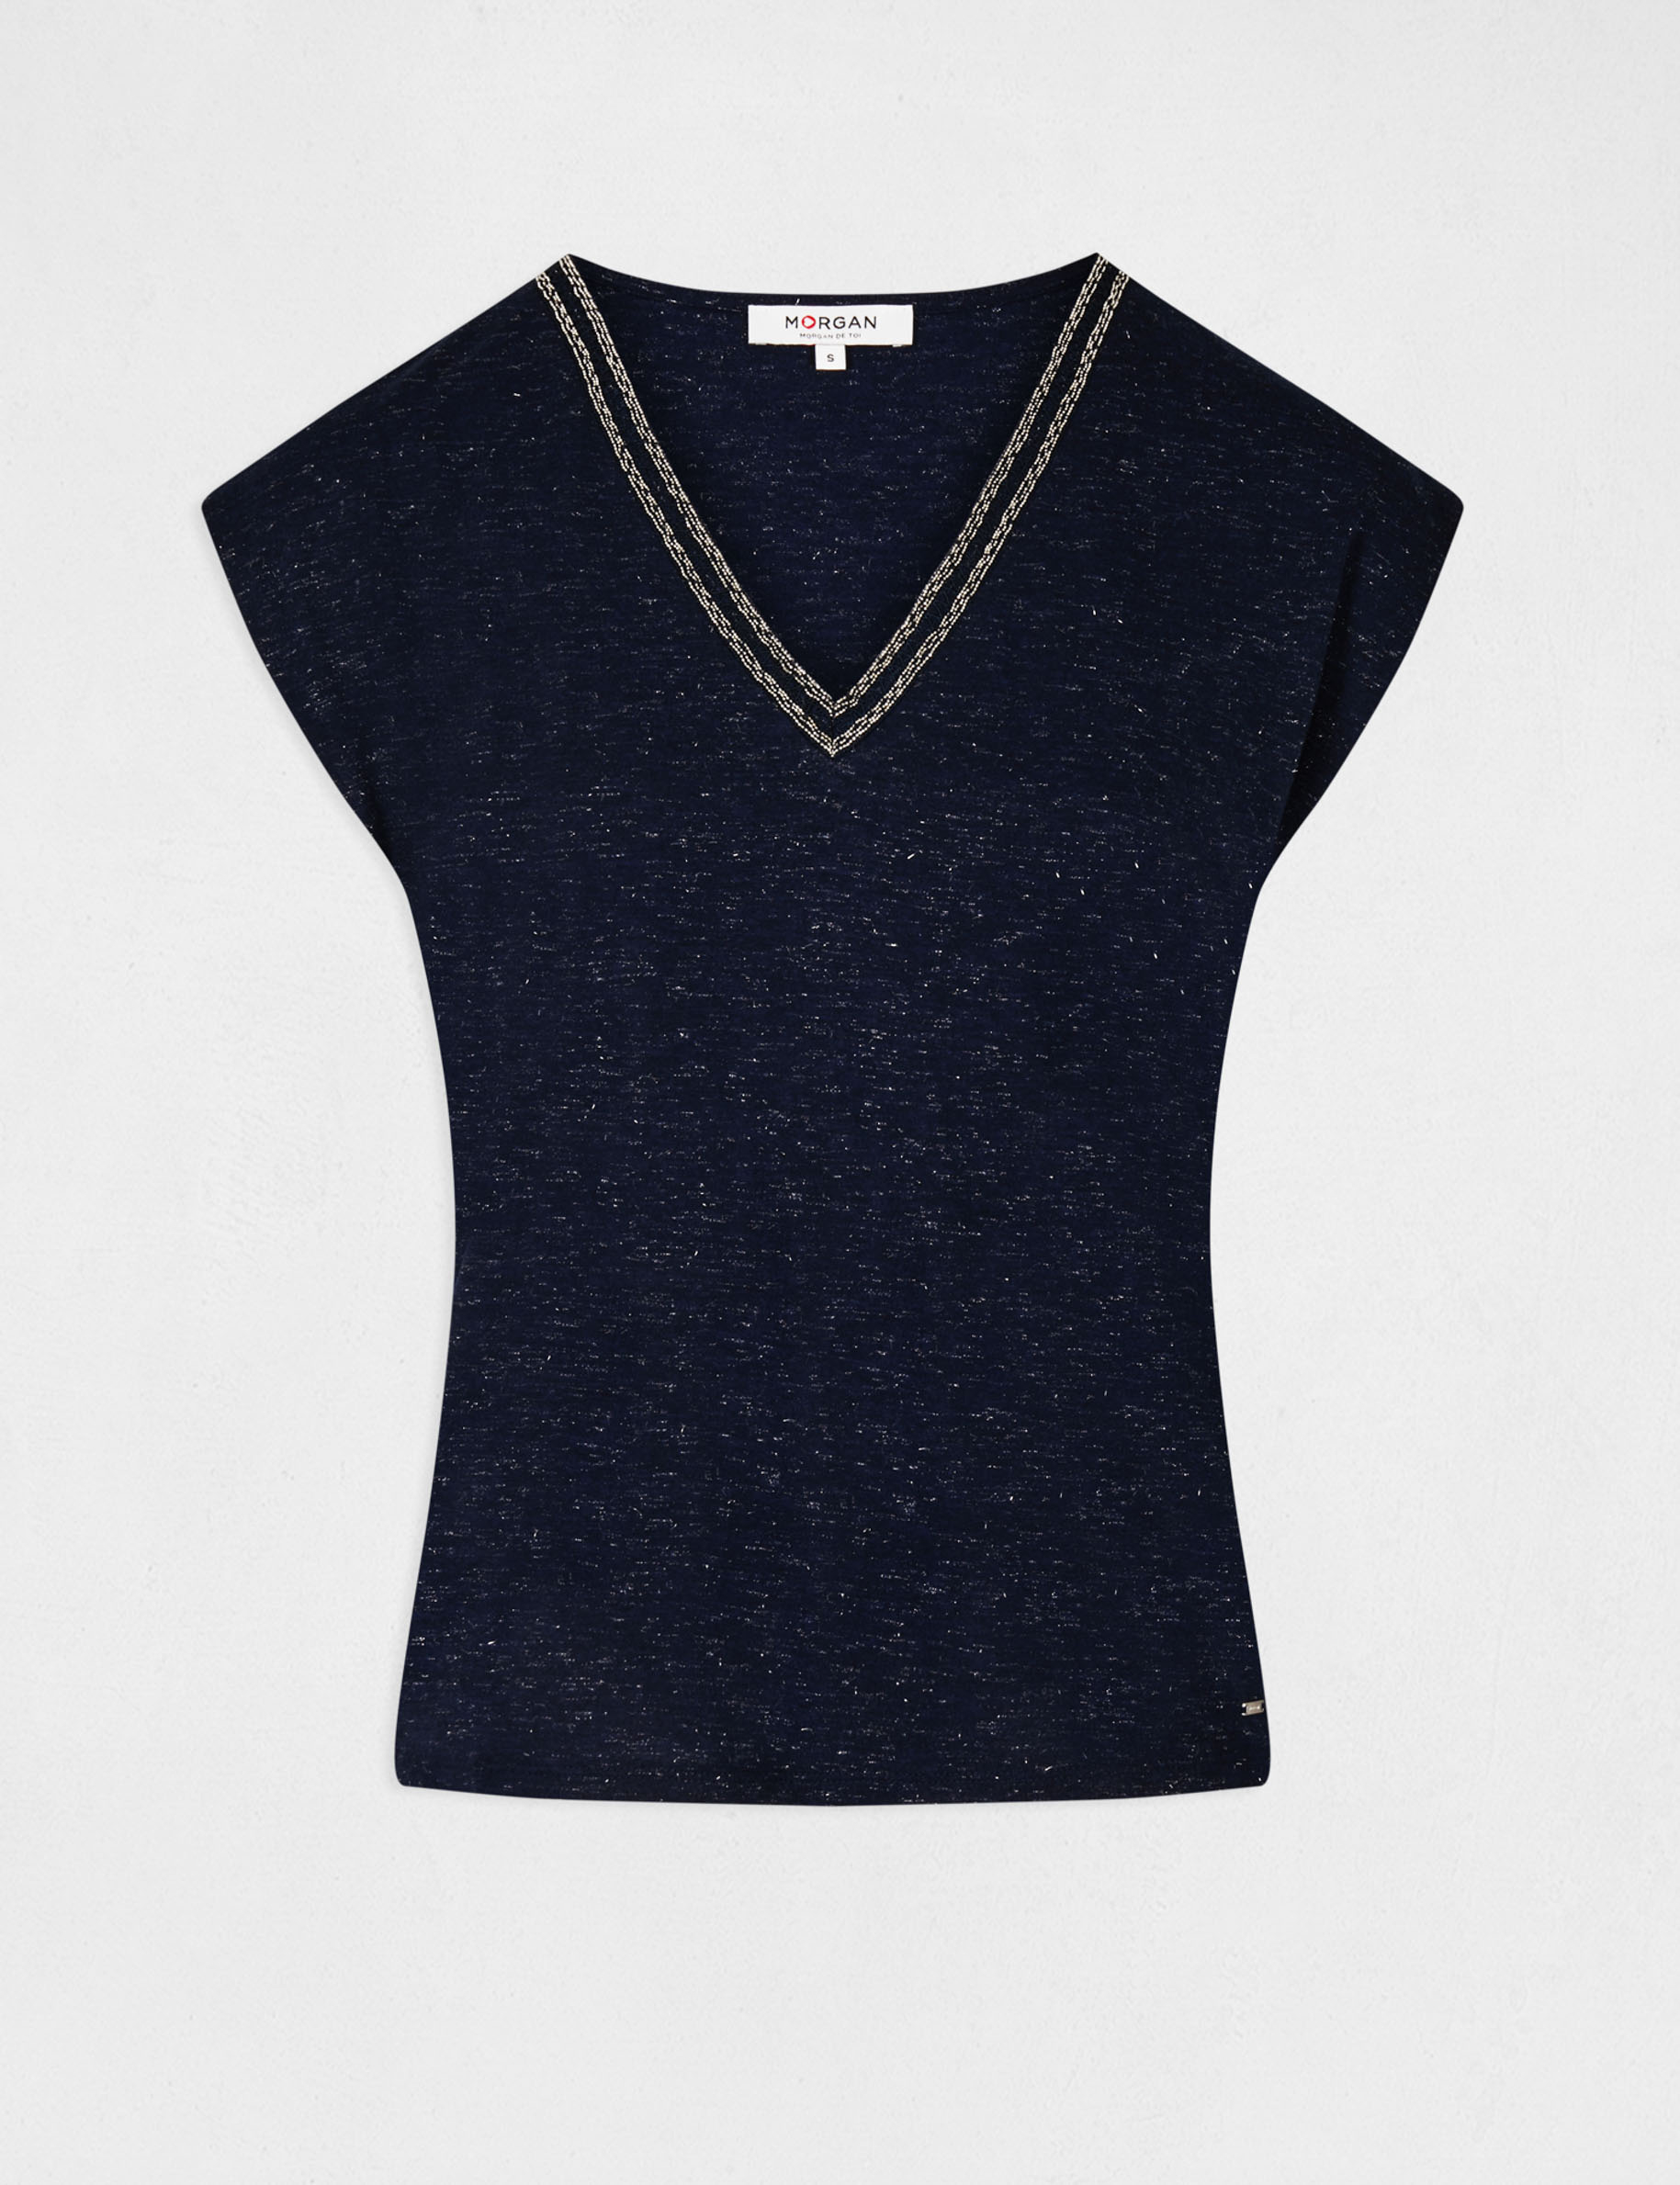 Short-sleeved t-shirt with V-neck navy ladies'